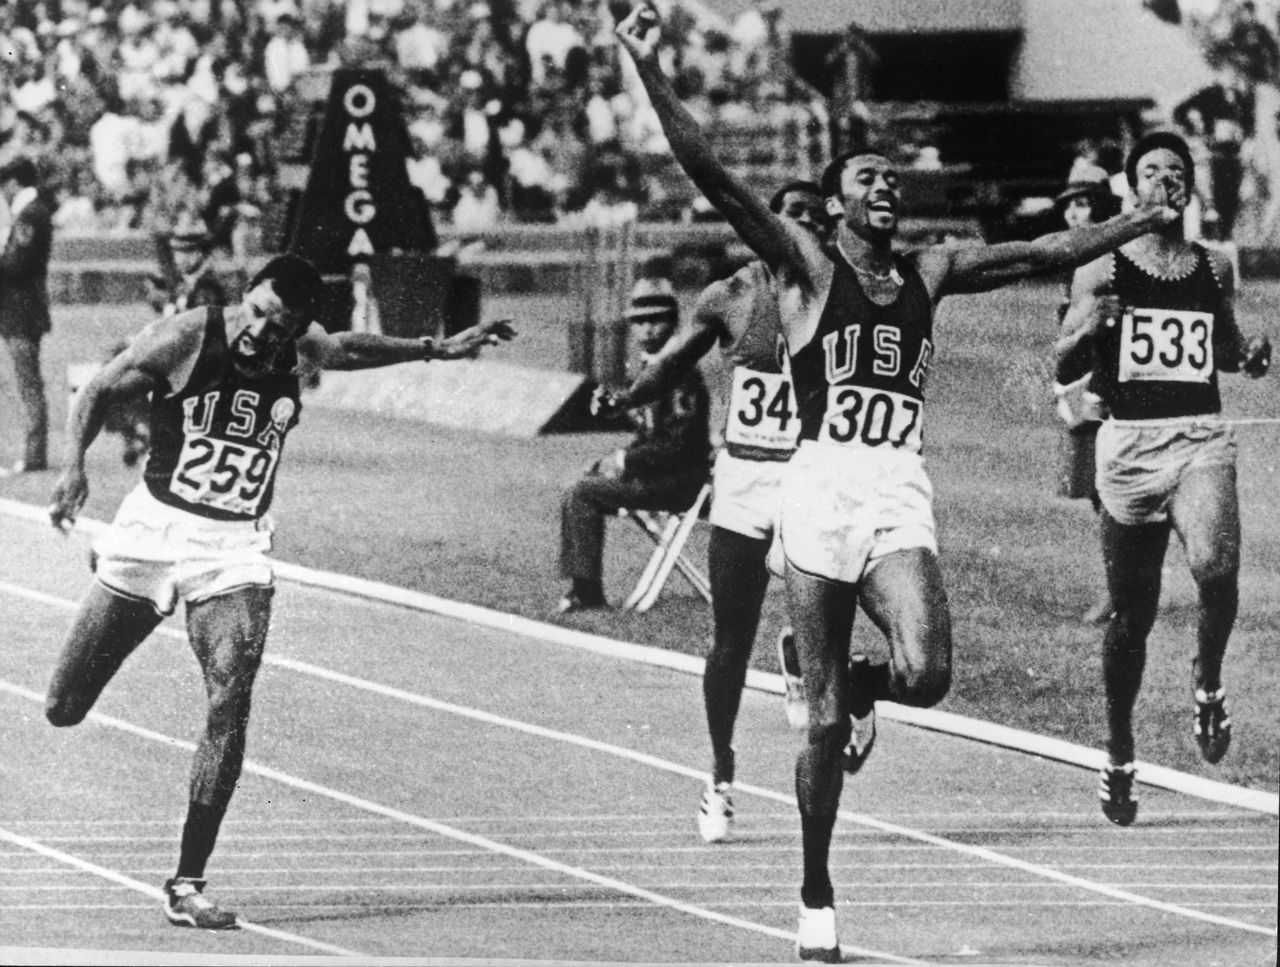 Tommie Smith raises his arms as he crosses the finish line to set a new world and Olympic record at the 1968 Summer Olympics in Mexico City, Oct. 16, 1968.